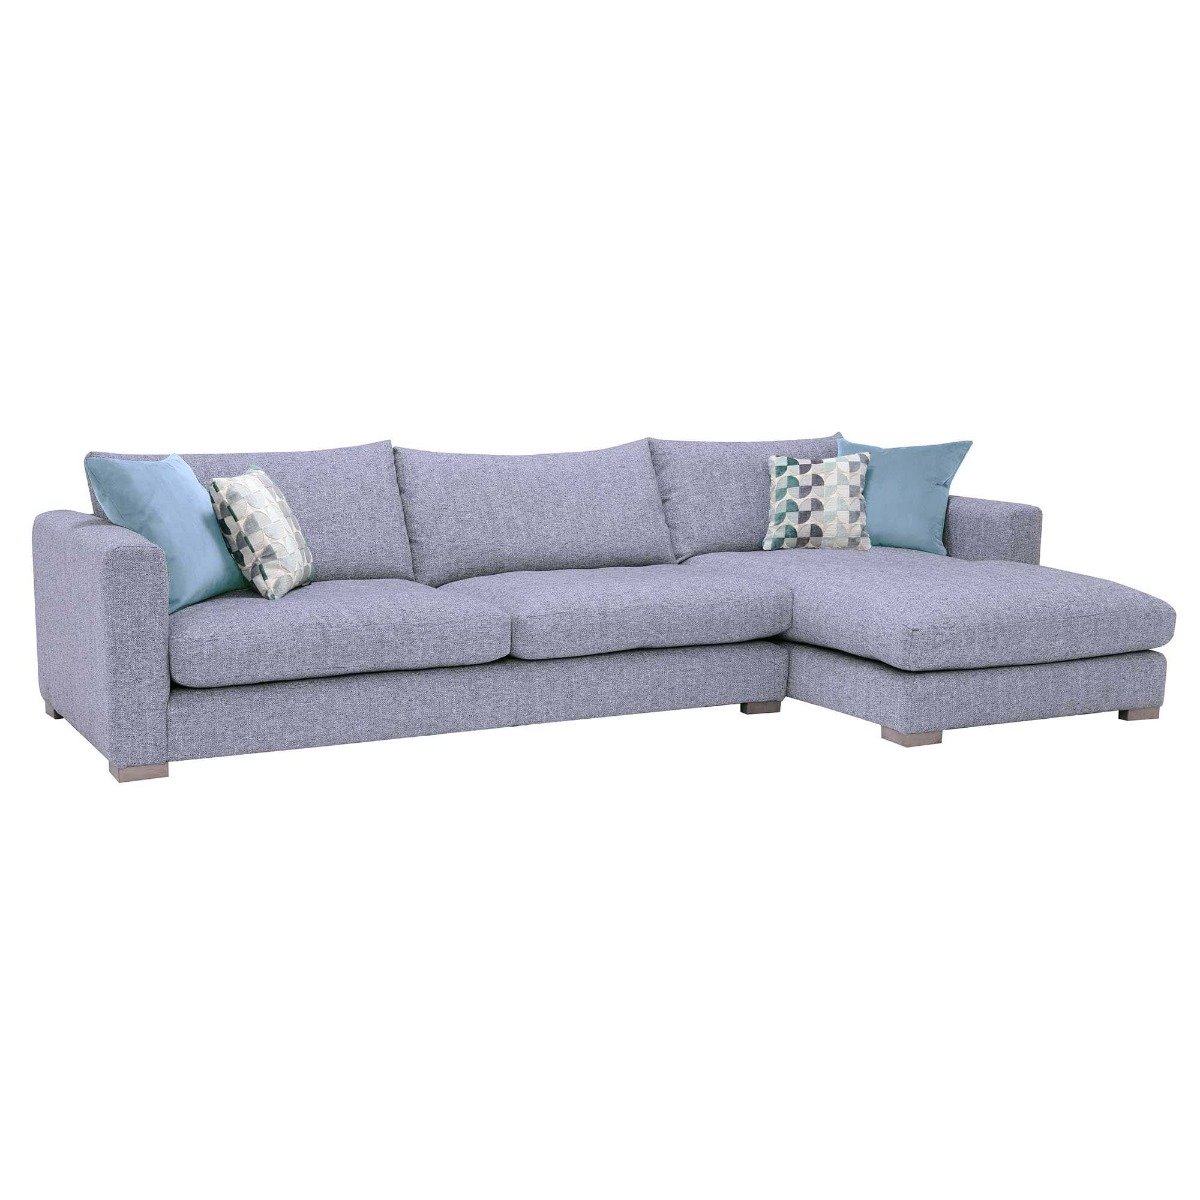 Fontella Large Chaise Right, Blue Fabric | Barker & Stonehouse